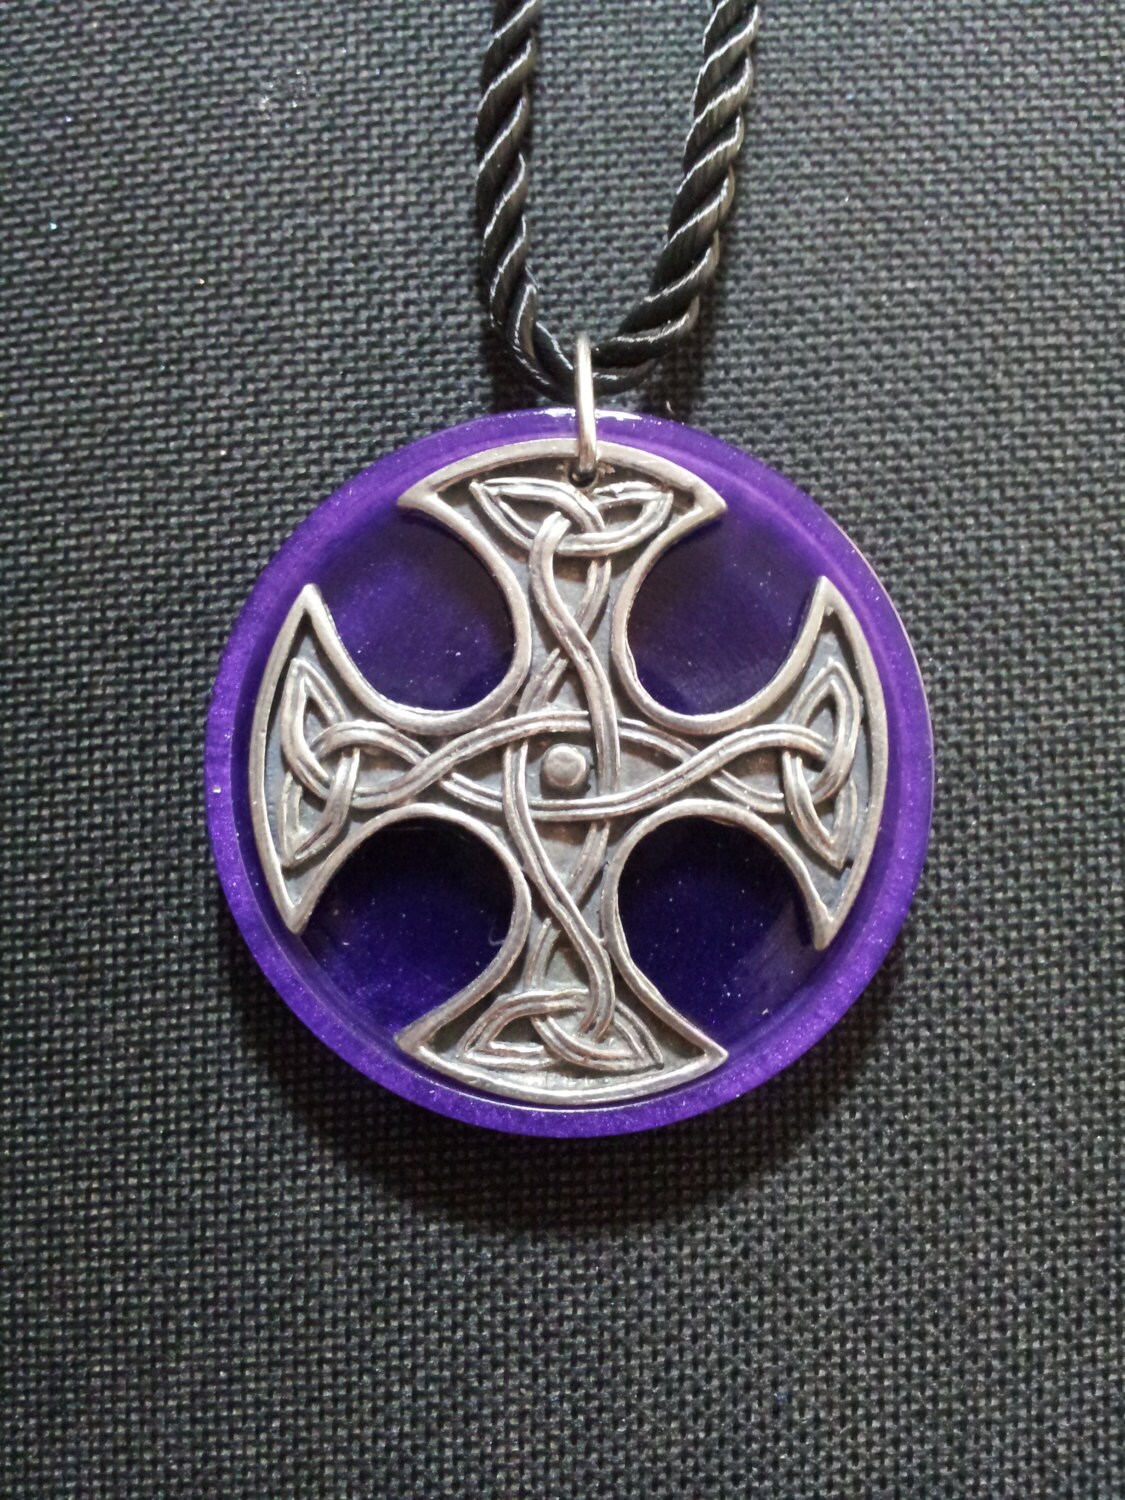 Celtic Cross Necklace in Purple Pearl Resin Free Shipping